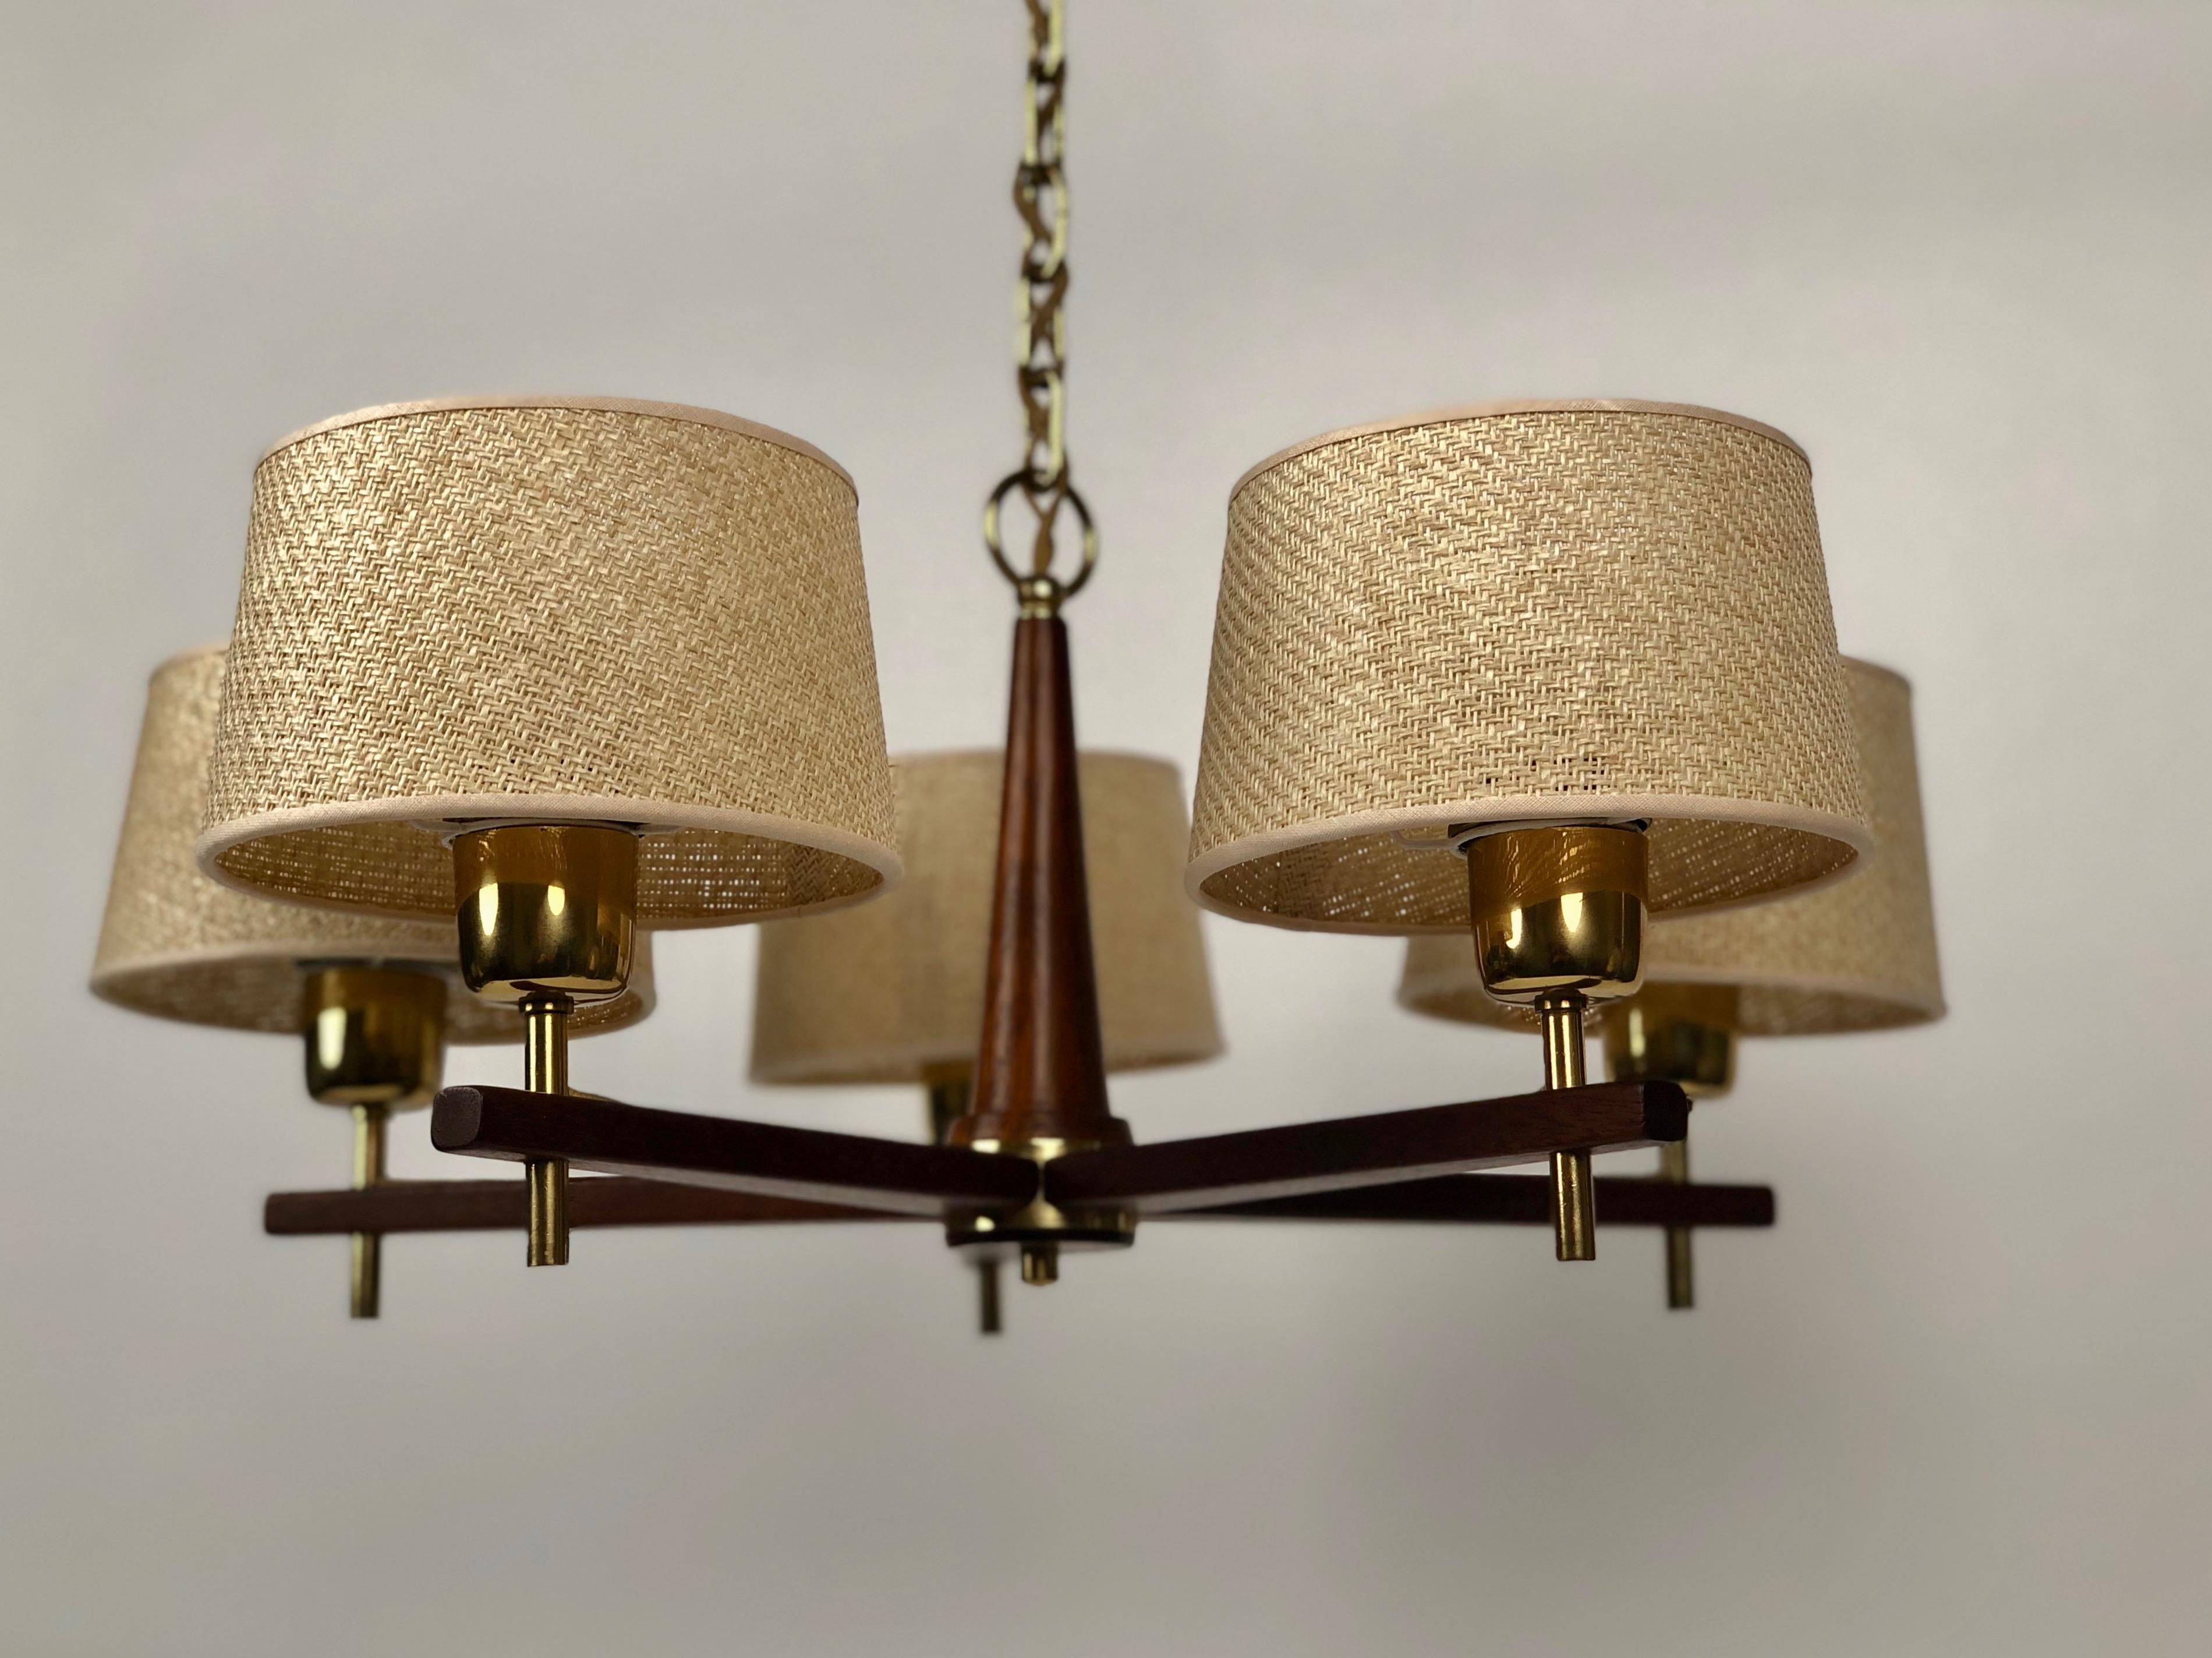 Five are chandelier in teak wood and brass with cane shades.
A typical design from the 1960's, 
The lamp is made in a high quality that is typical for J.T. Kalmar productions.
The wood is polished with wax. Beautiful details include the silk covered